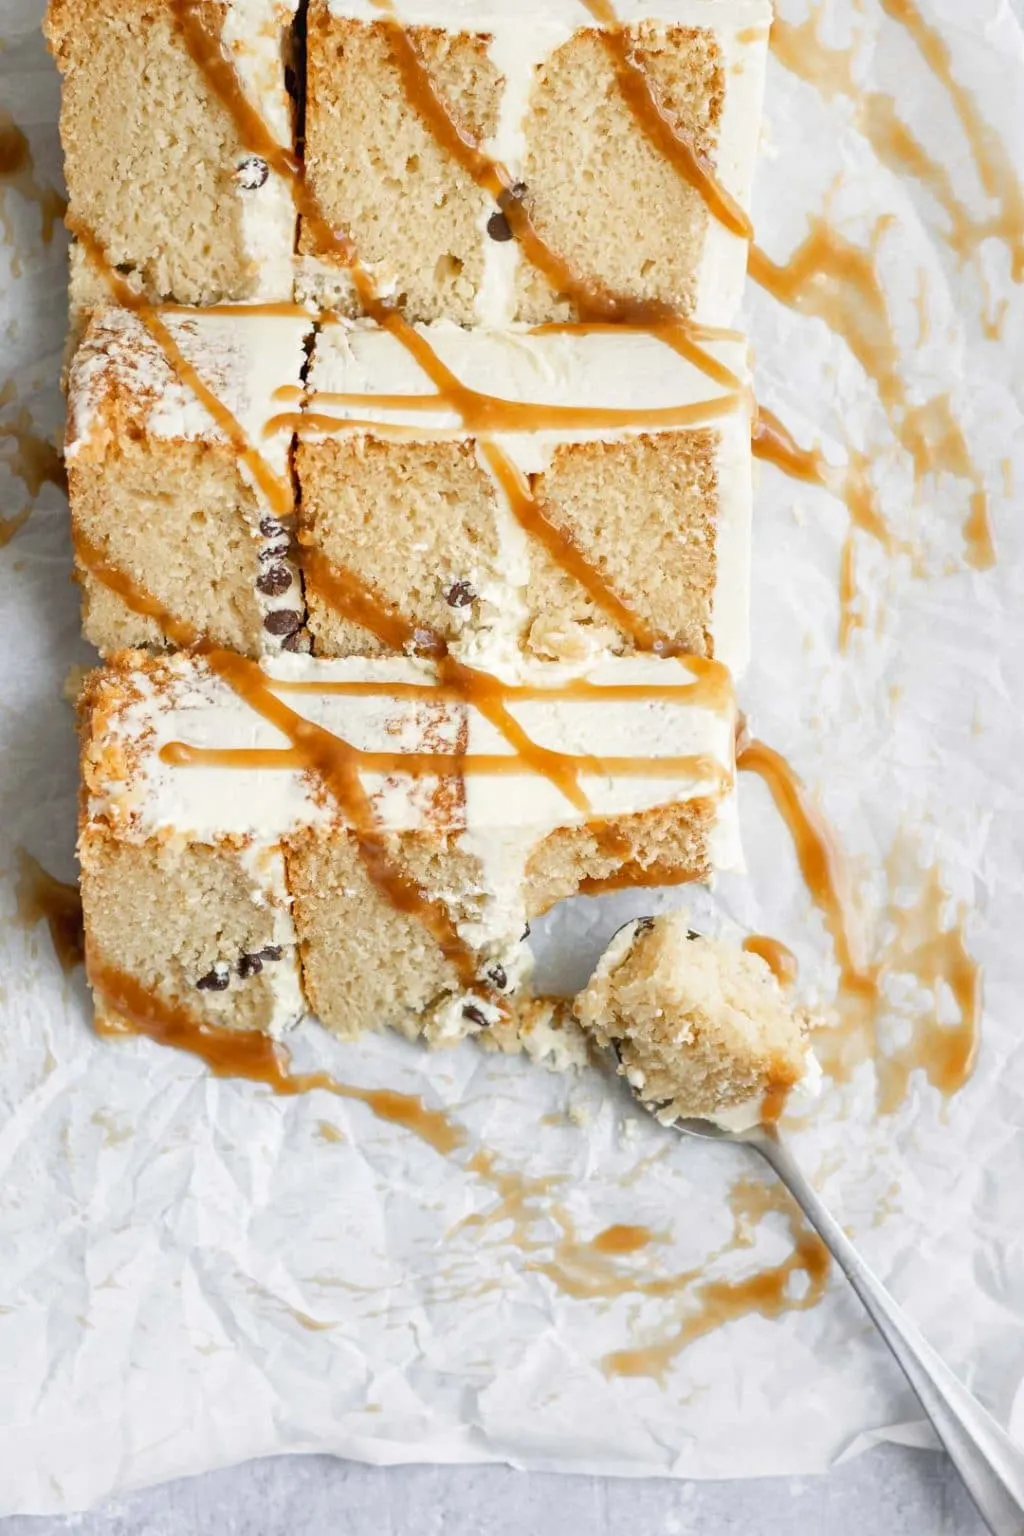 Three slices of vegan vanilla cake with a drizzle of salted caramel over the slices and a spoonful of one bite taken out of the cake